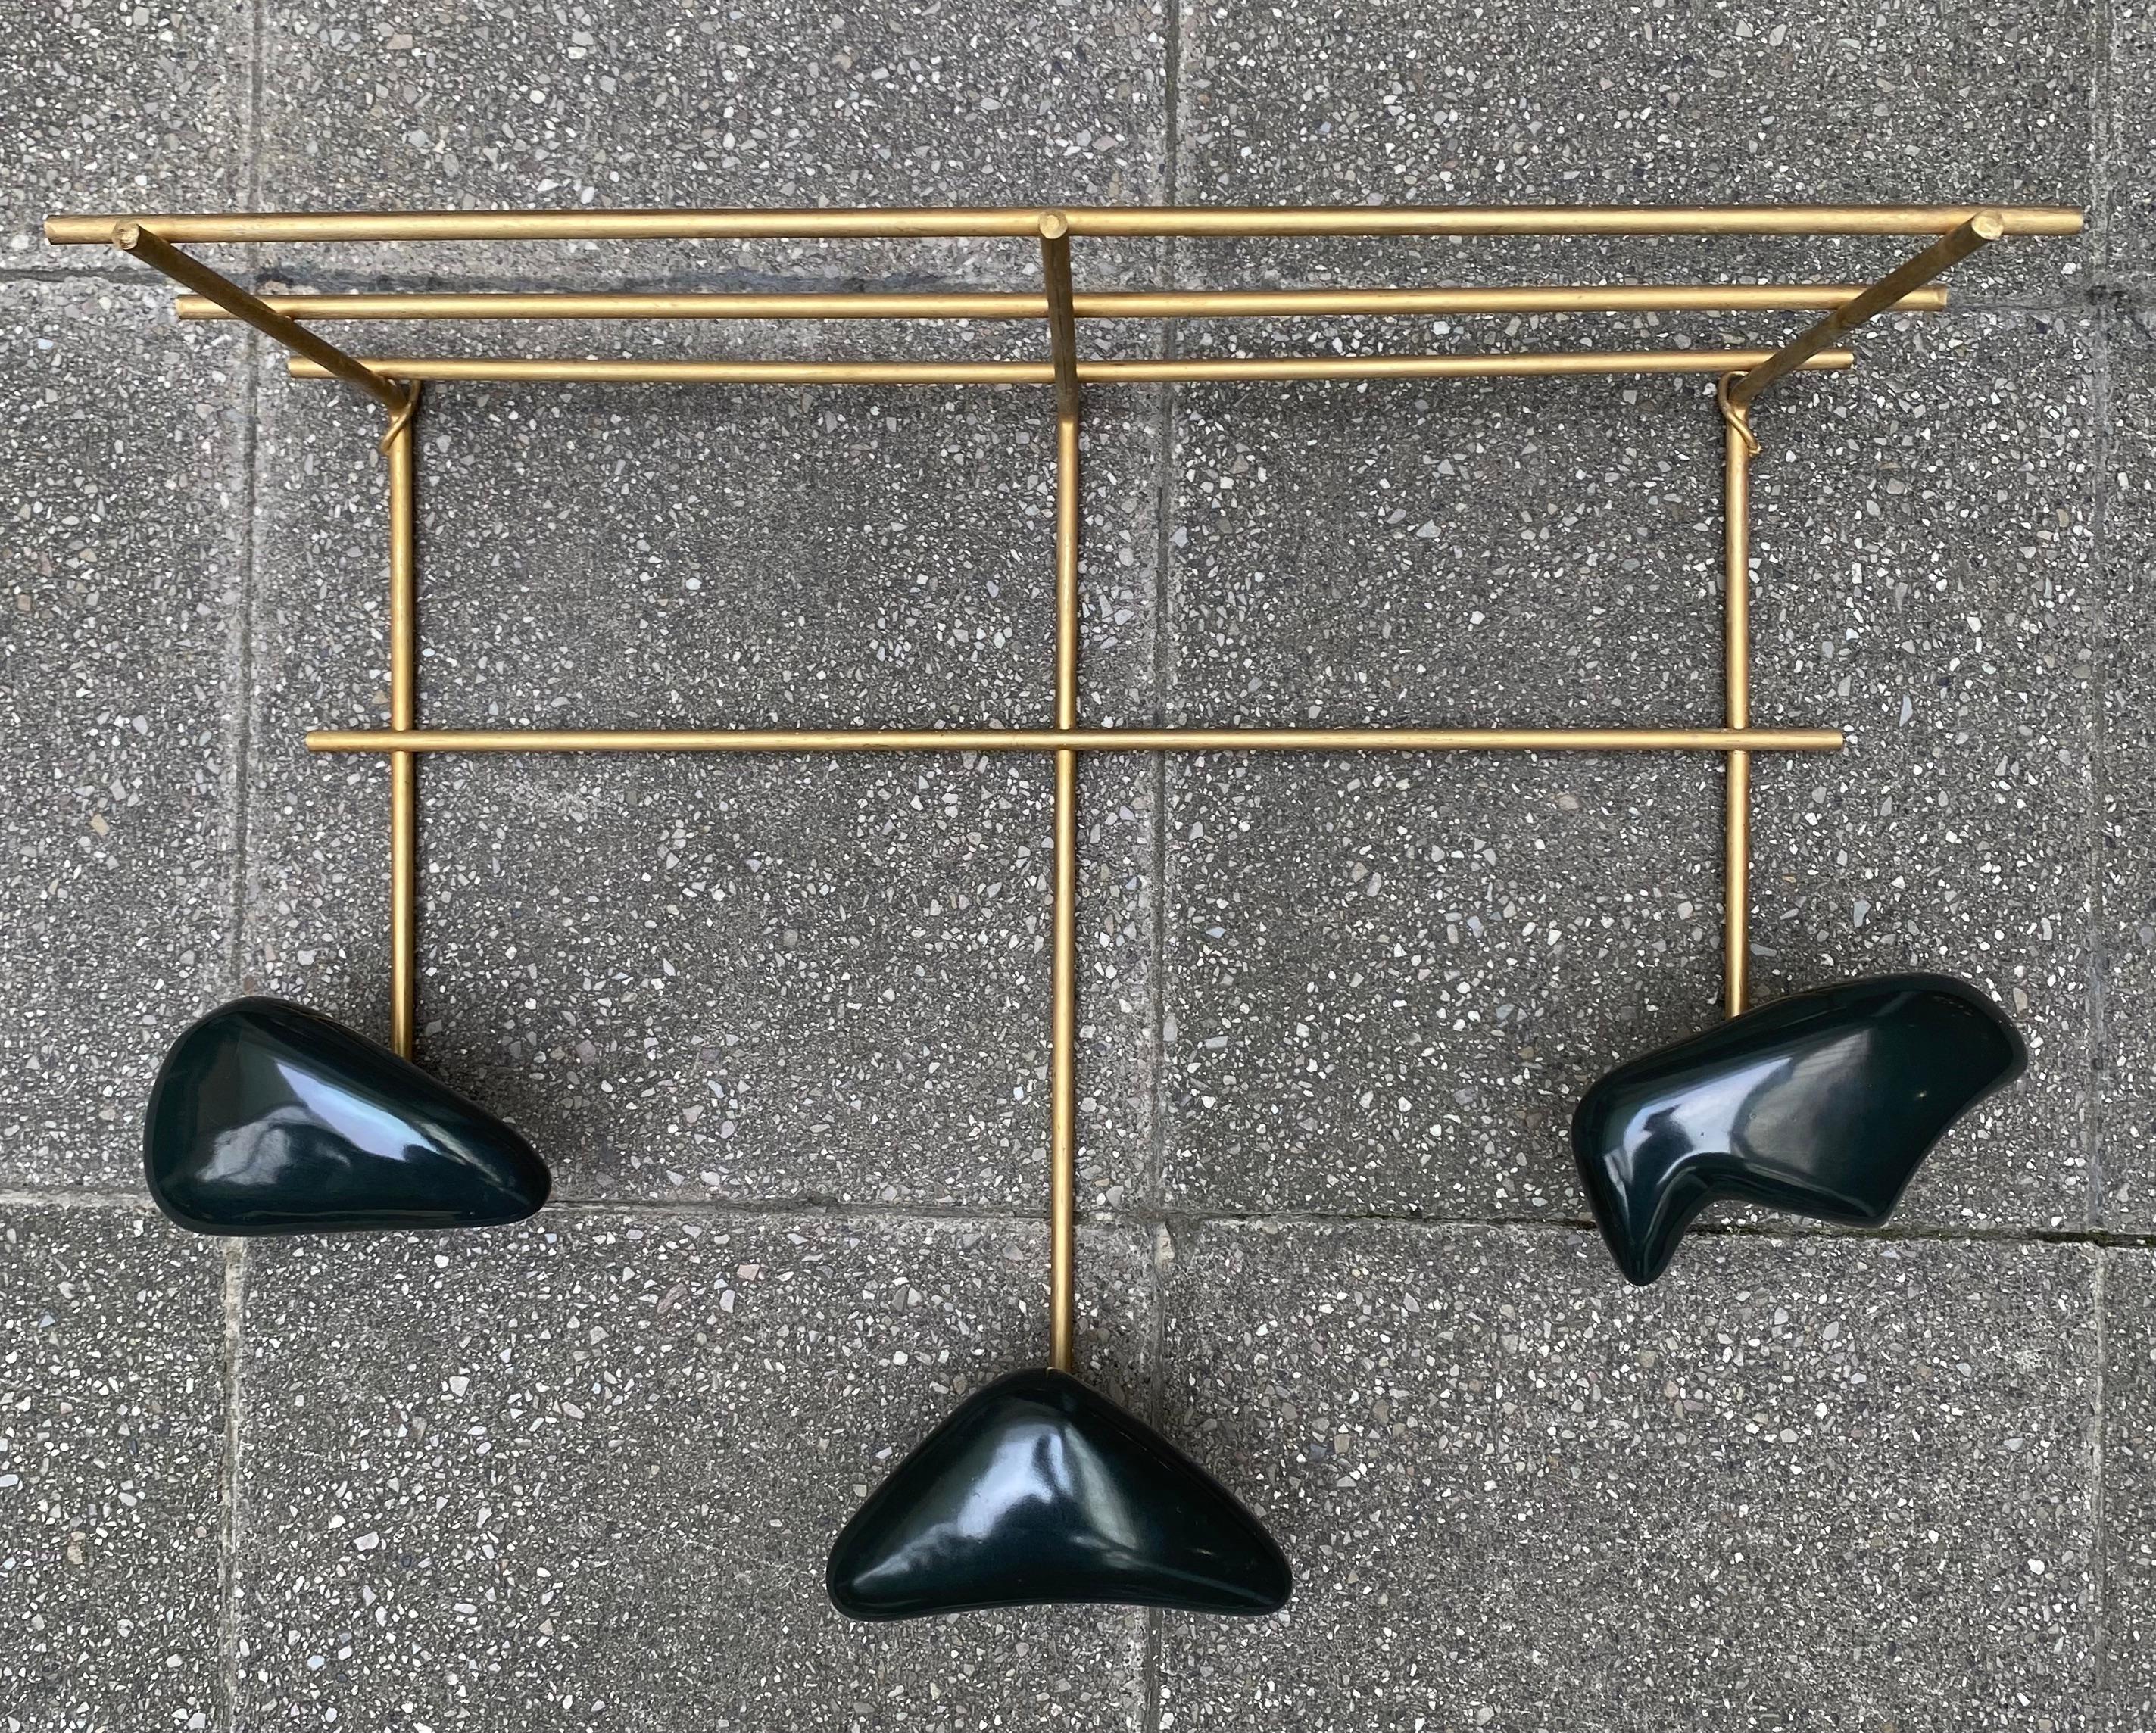 JOUVE - COAT RACK
Georges JOUVE (1910-1964) for Marcel ASSELBUR (1910-1964)
Wall coat rack with three hooks, circa 1955.
Golden brass and black ceramic.
36 x 49.5 x 22cm
In very good condition

Who is Georges Jouve?
Georges Jouve is a French